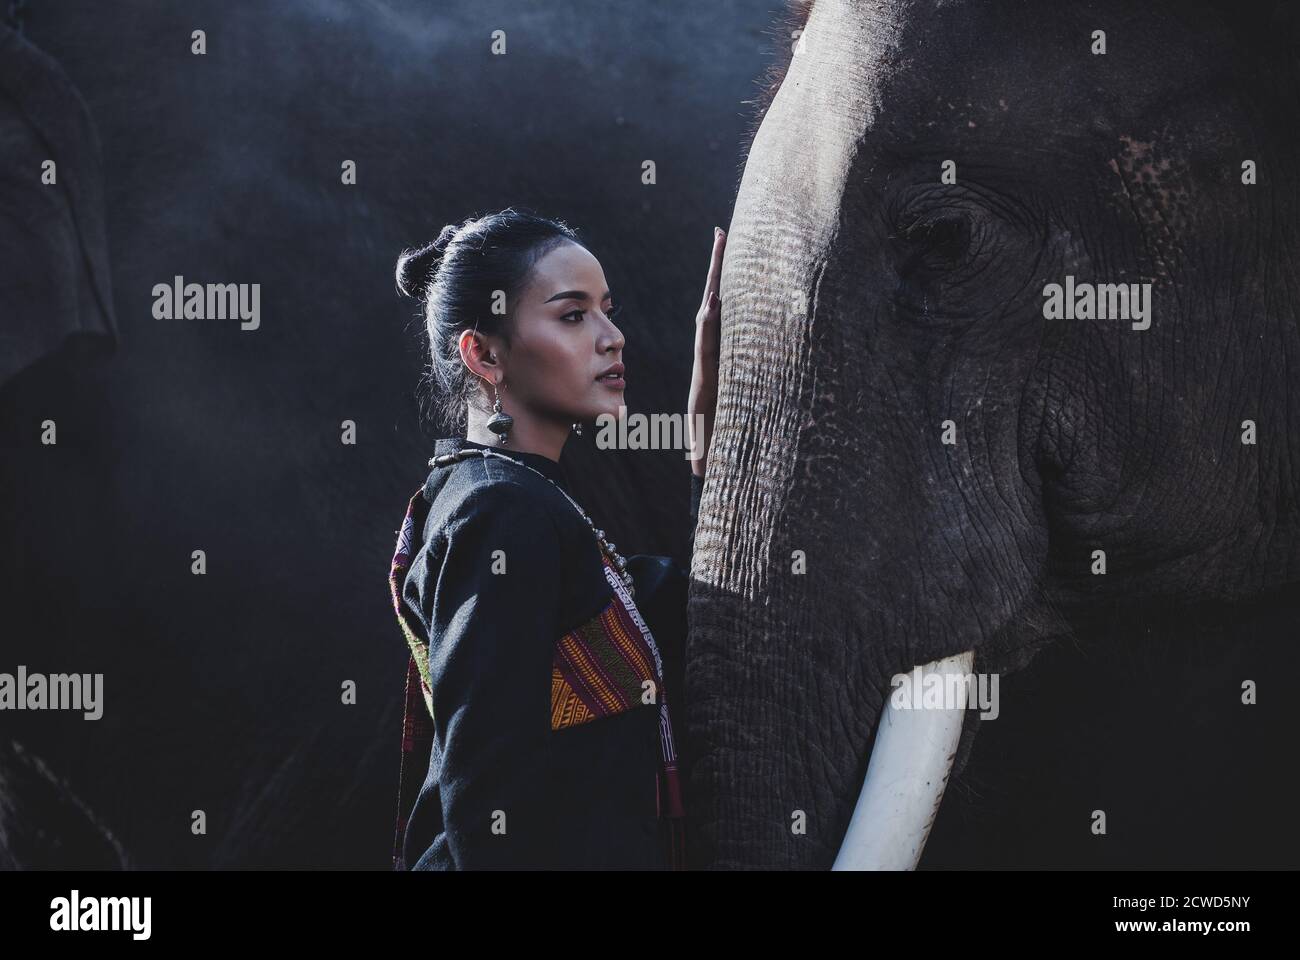 Beautiful thai woman spending time with the elephant in the jungle Stock Photo